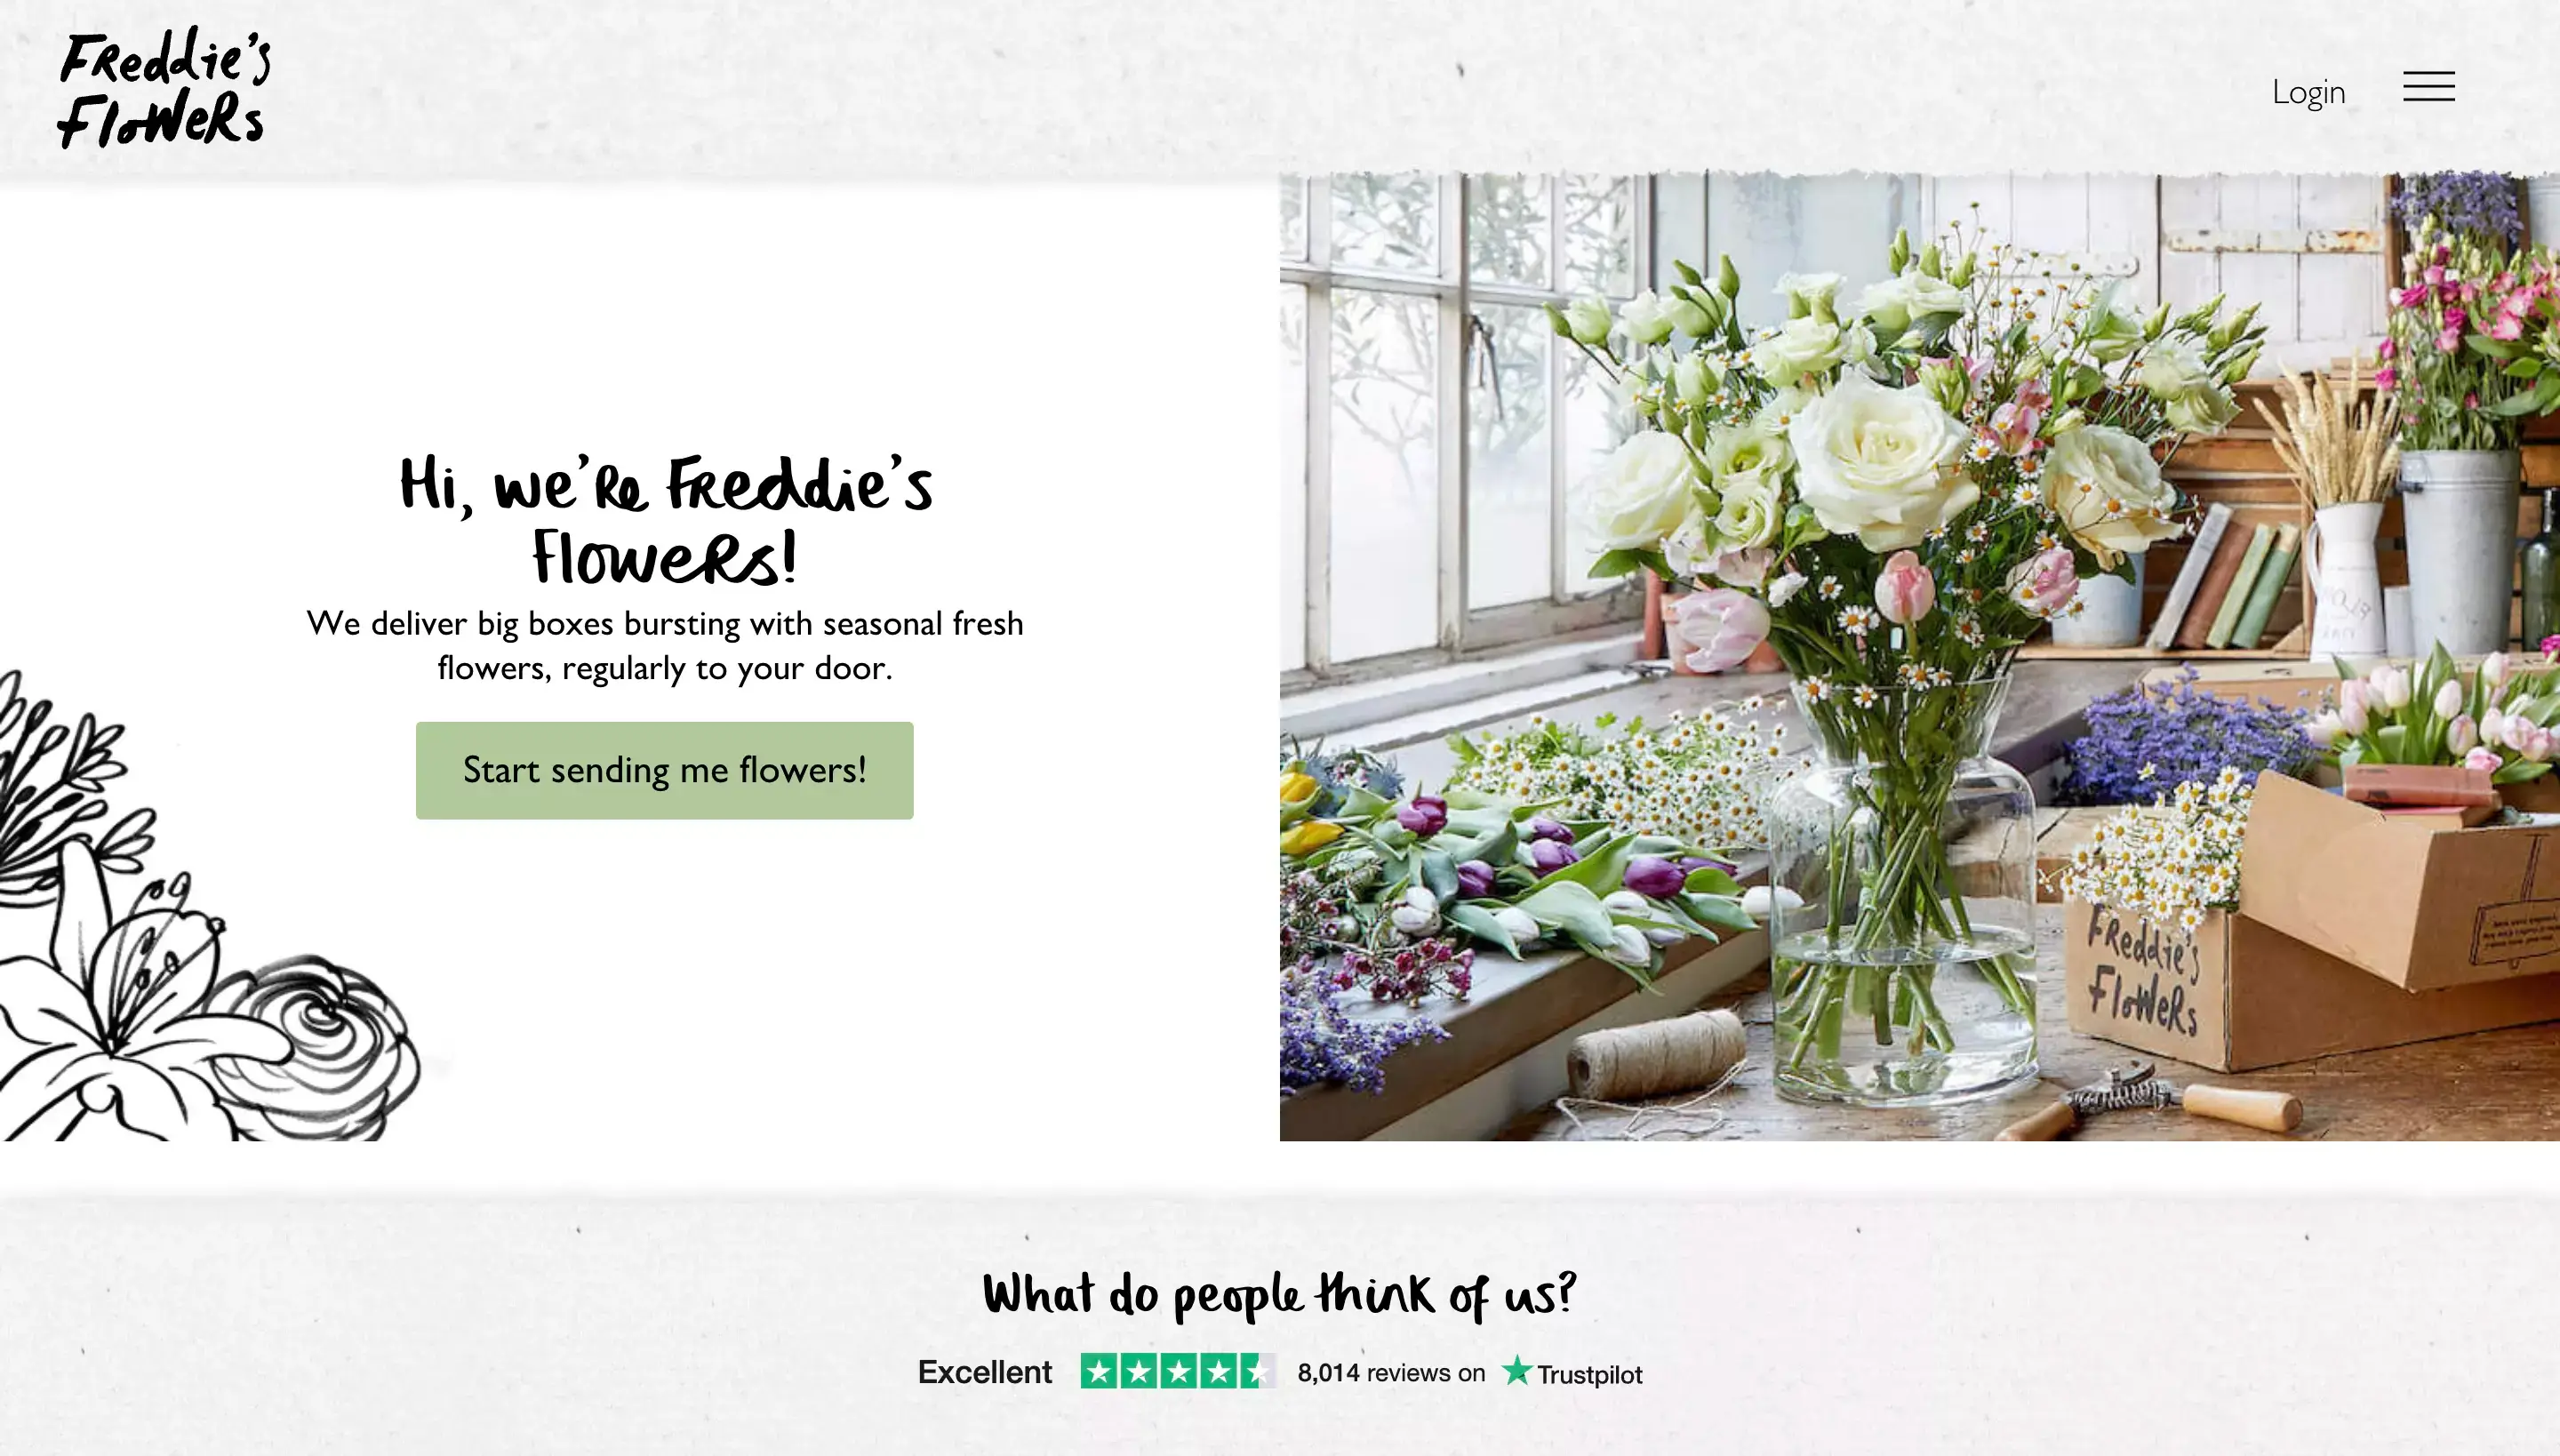 ButterCMS client, Freddie's Flowers, home page